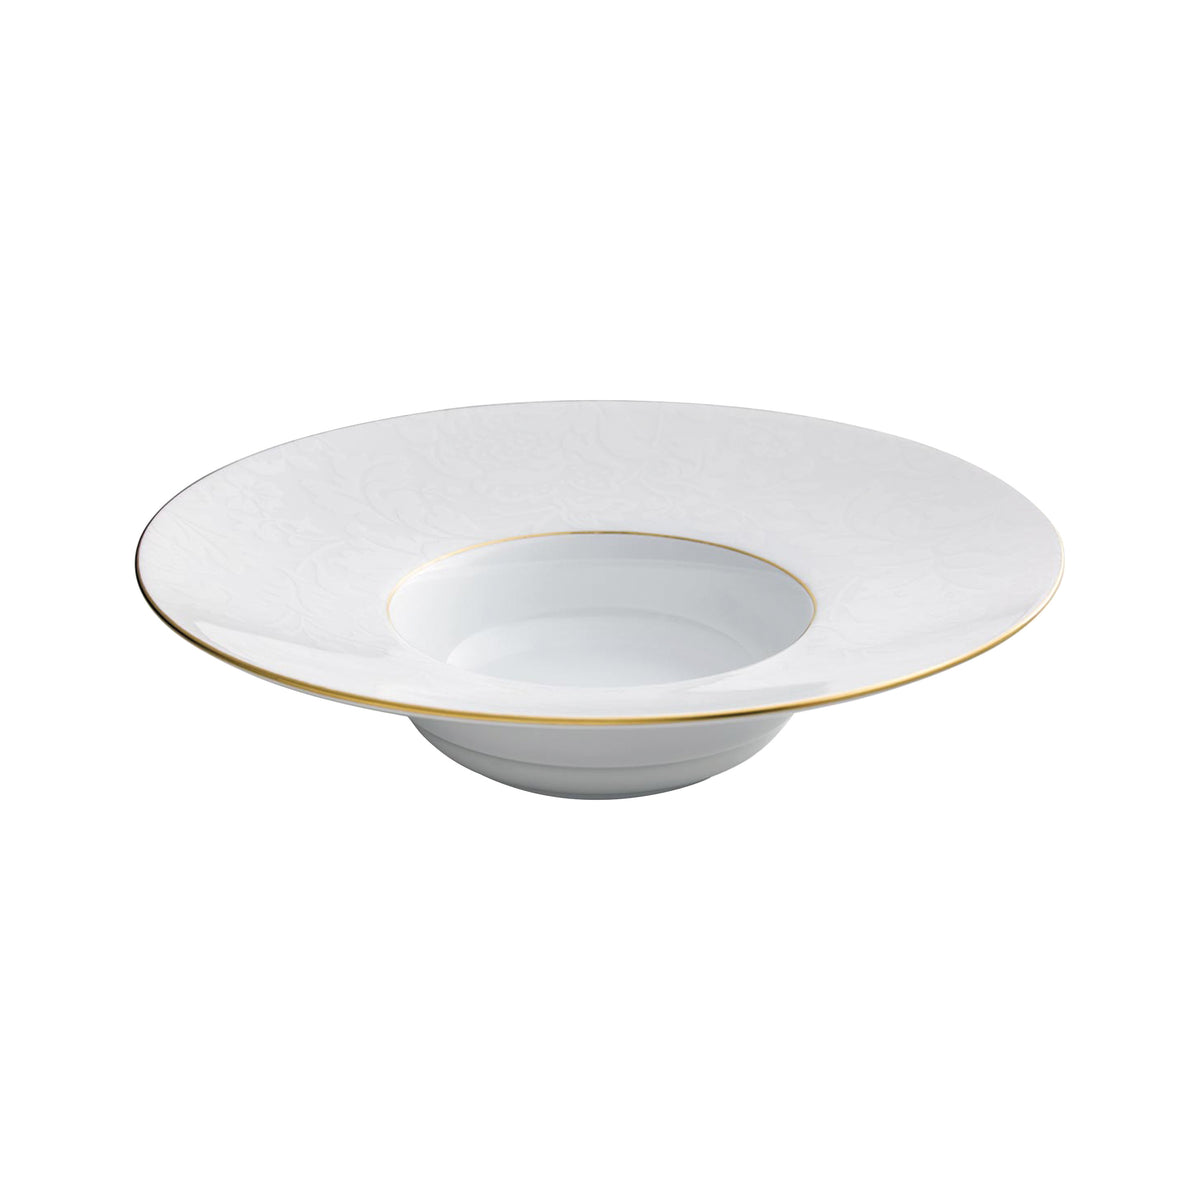 INDIENNES White on White Gold Thread - Rim soup plate, large